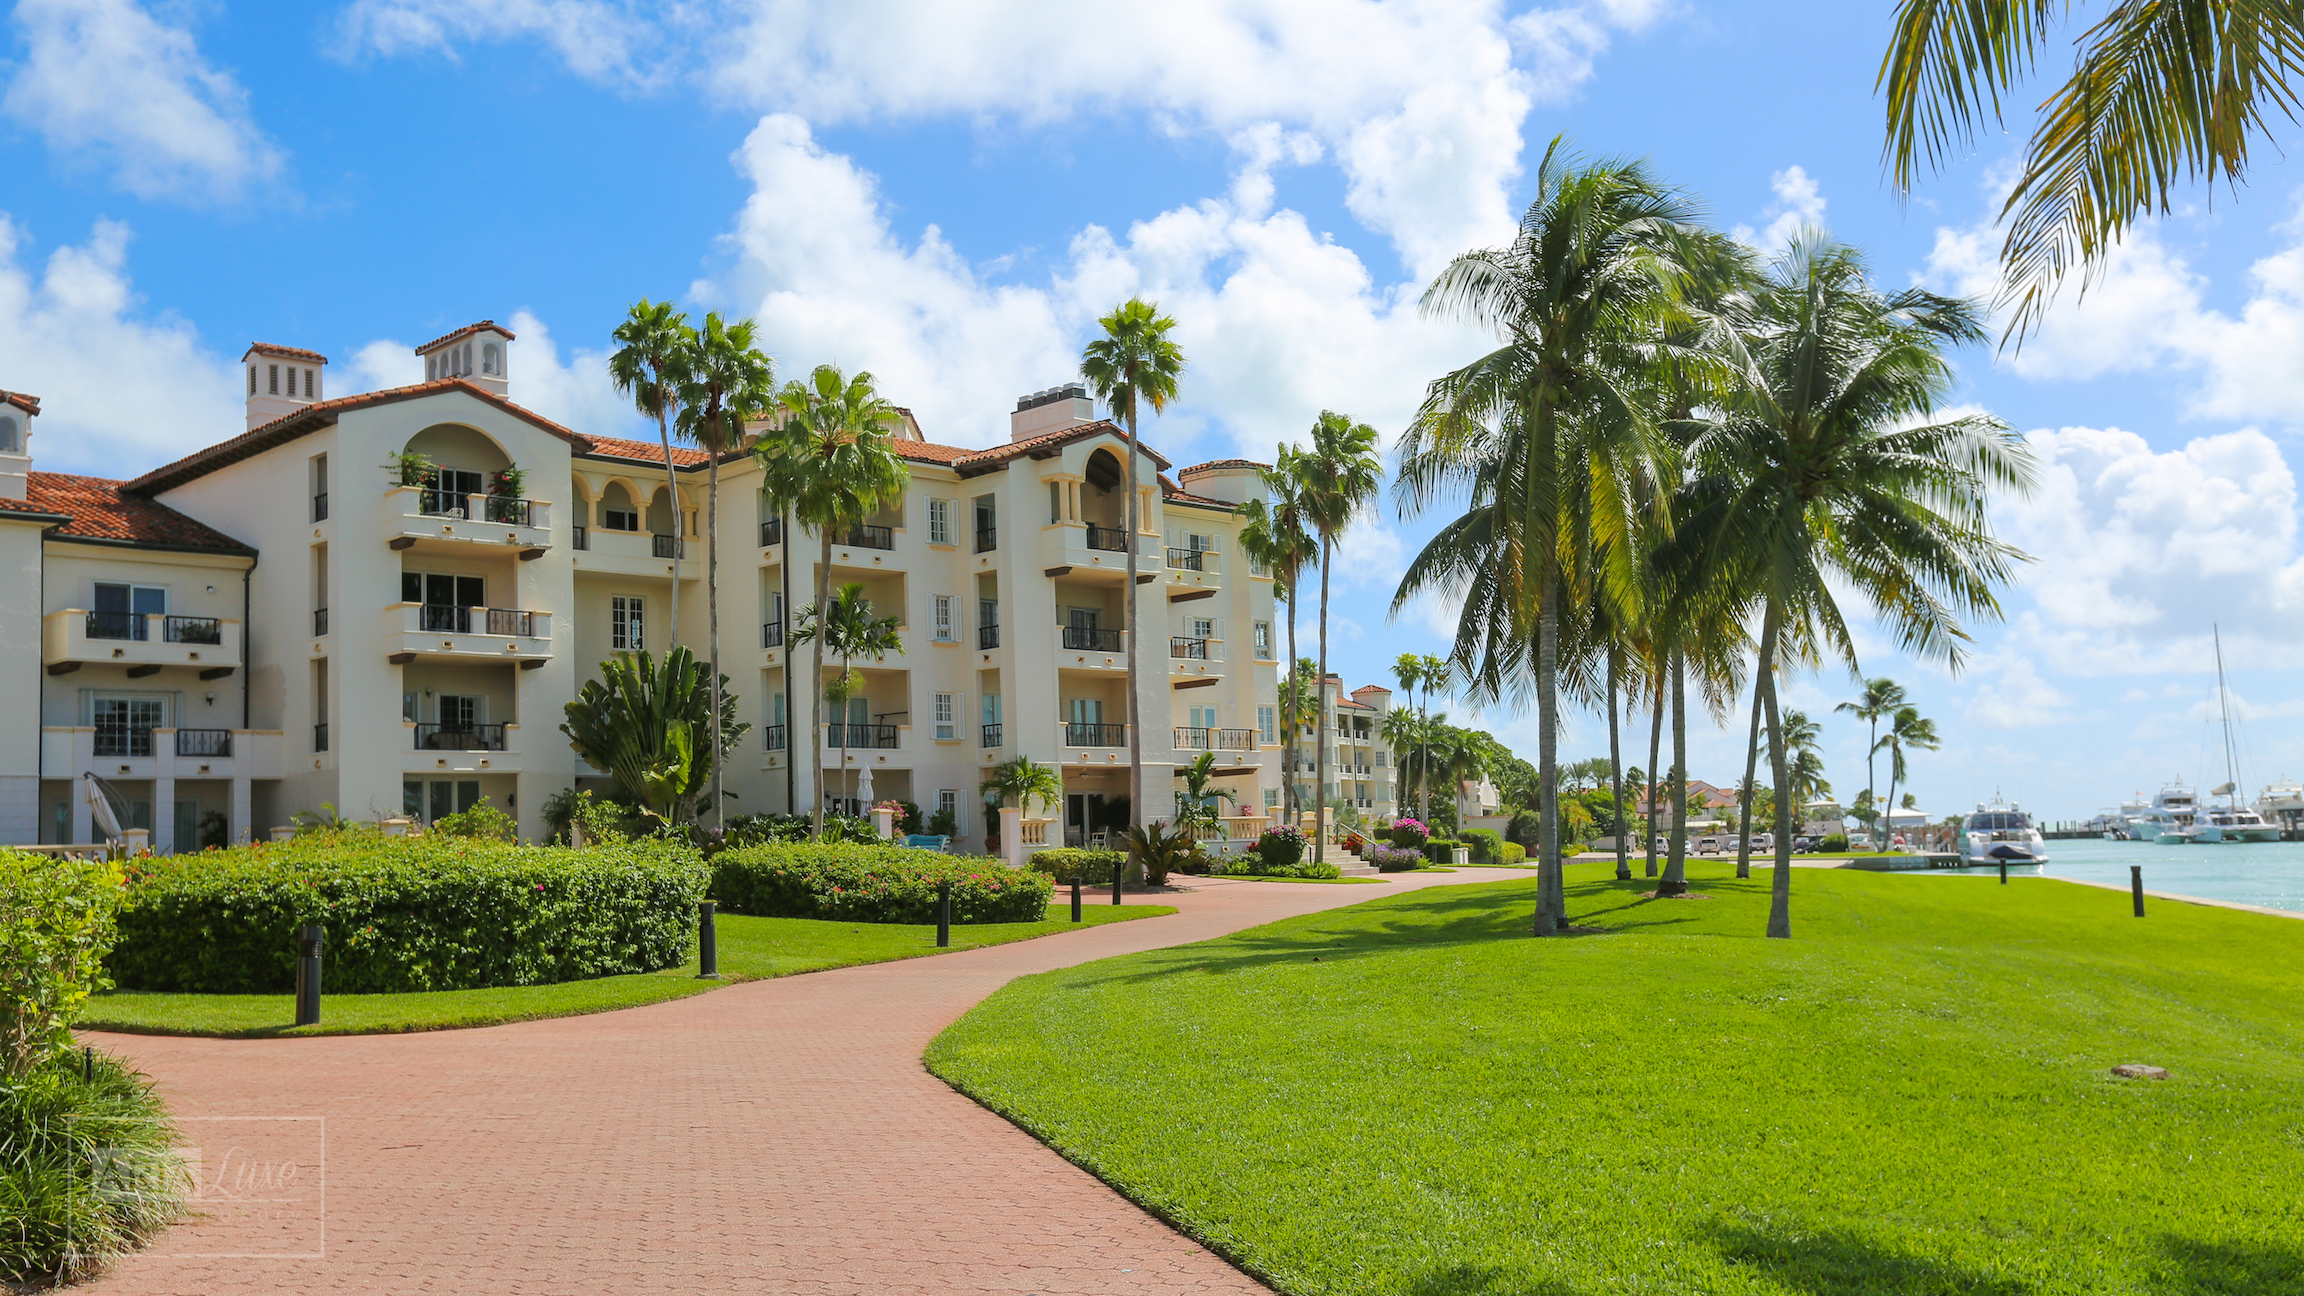 Fisher Island Homes For Sale – Our Top 5